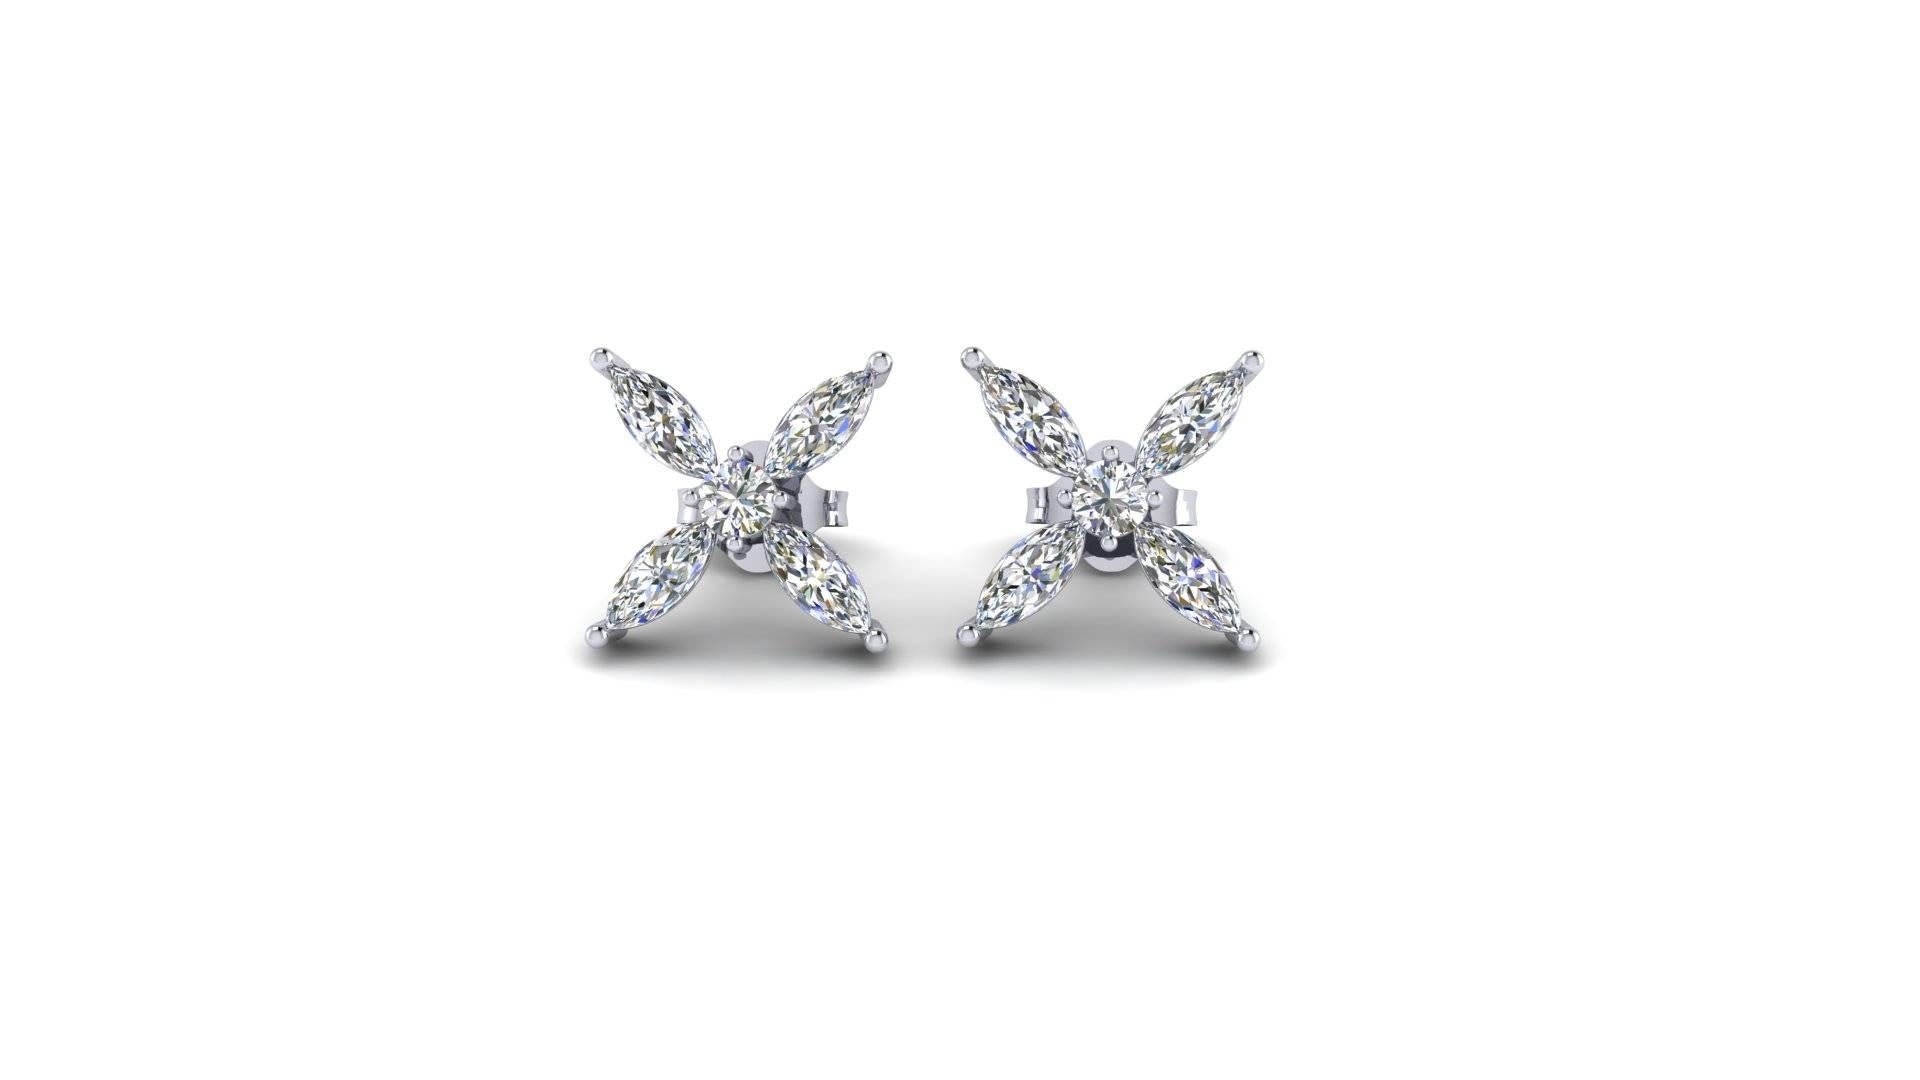 FERRUCCI 1.06 carats Marquise and Round diamonds earrings made in 18k white gold in New York by Italian master jeweler, pret-a-porter, easy to wear in any occasion from the office to evening events.

